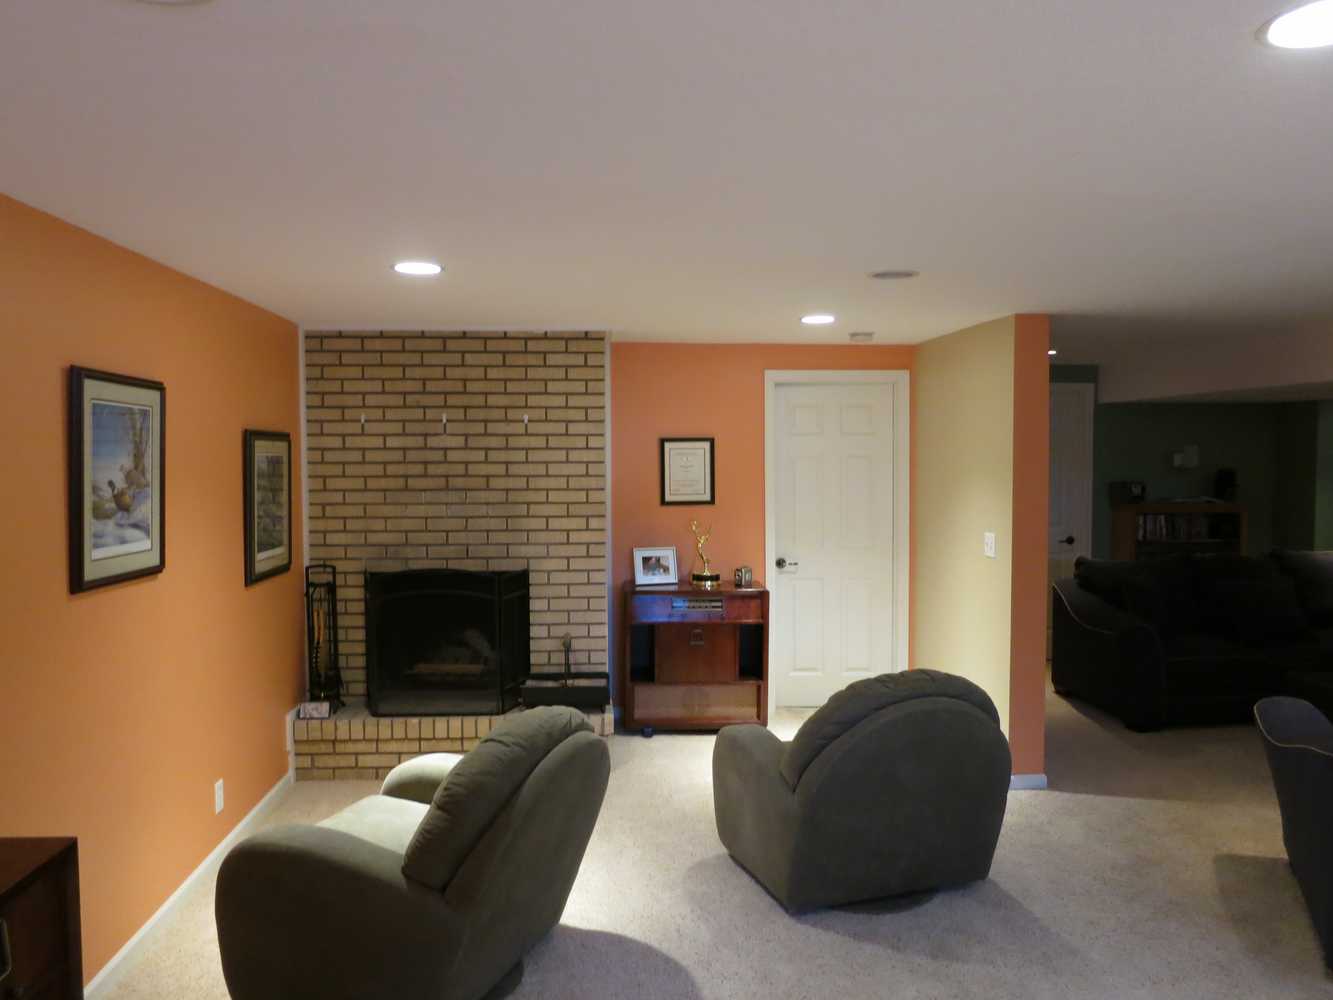 House Remodeling | Basement Remodeling | Minneapolis | Wuensch Construction